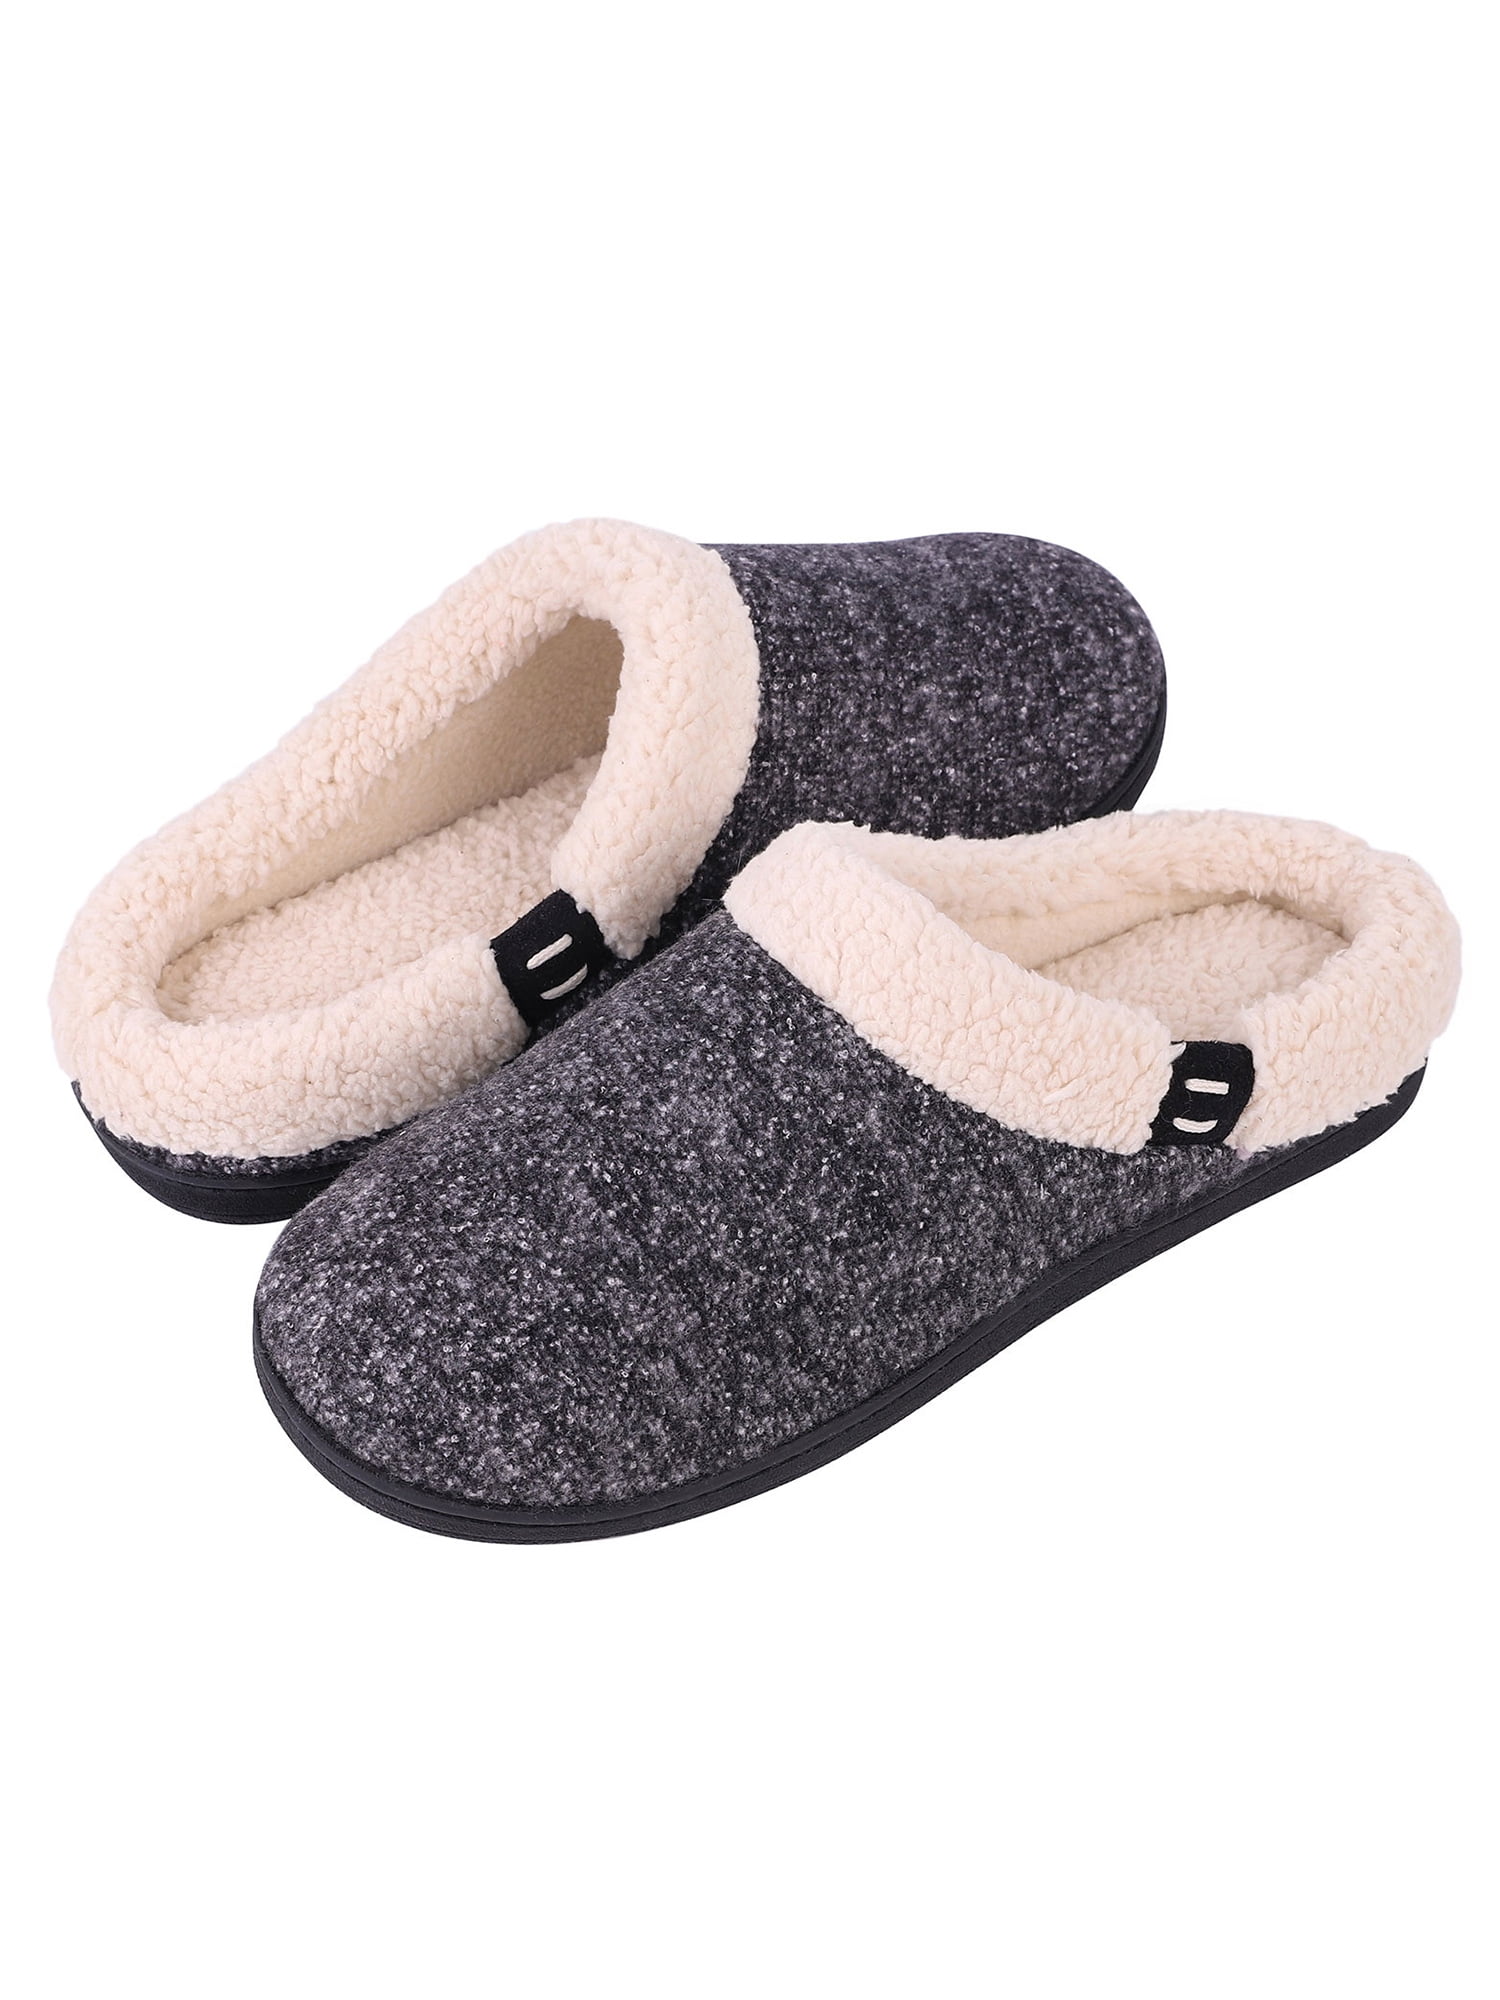 NEWMI - Women Warm Clog Slippers Plush Lined House Home Slippers Indoor ...